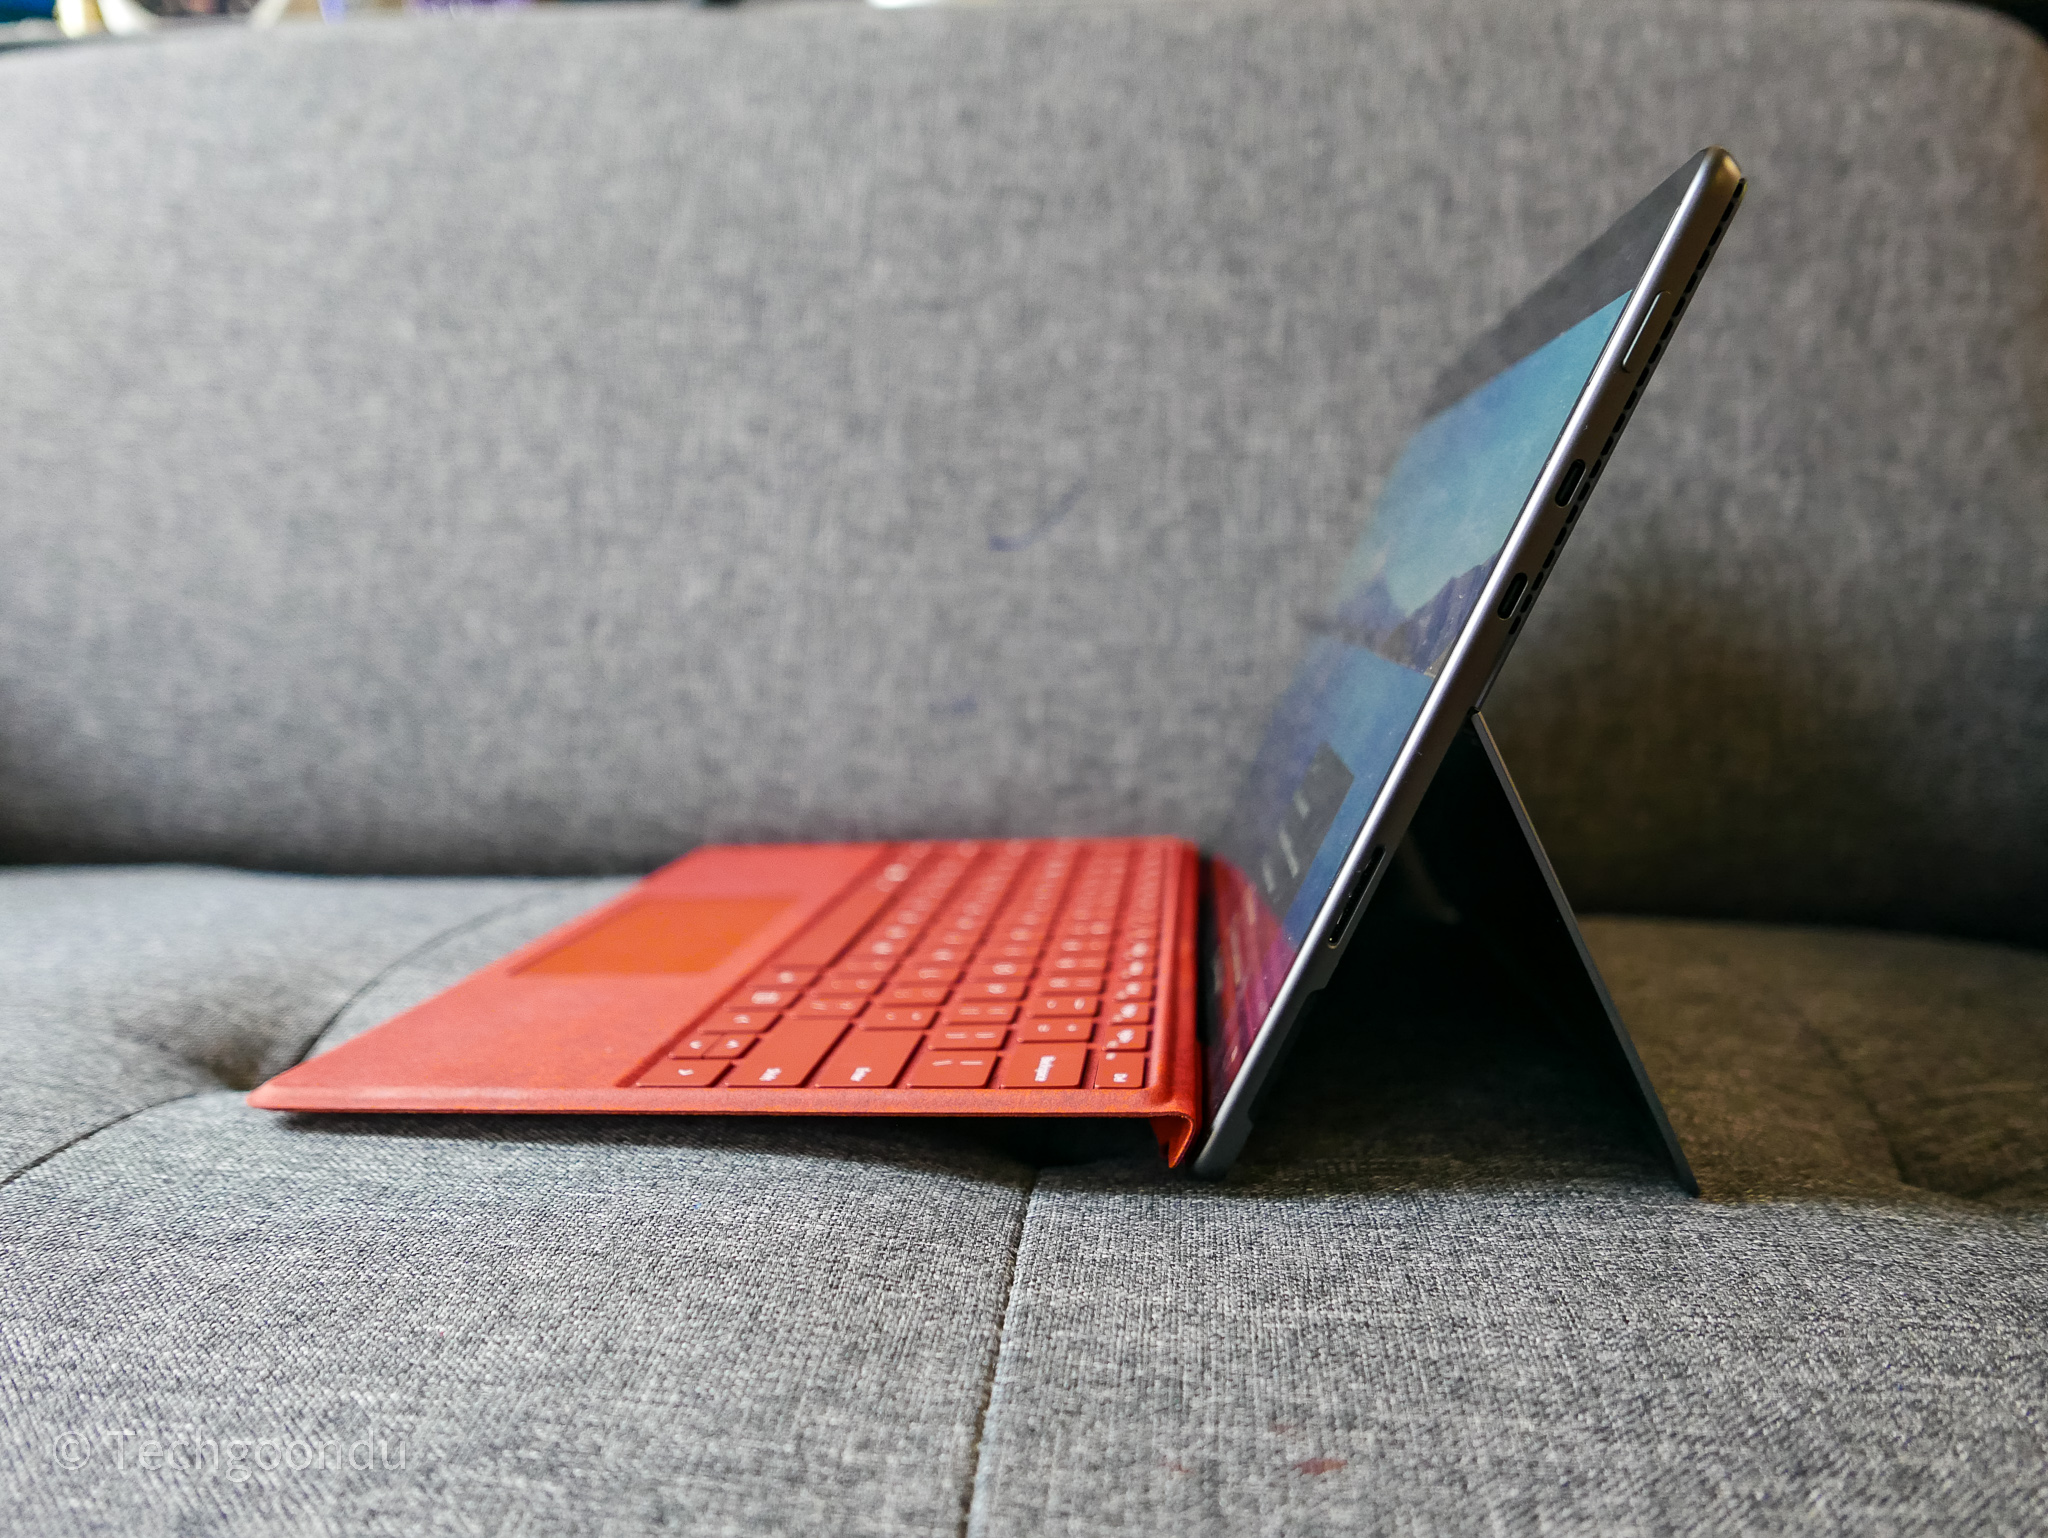 Microsoft Surface Pro 8 review: A premium laptop and tablet rolled